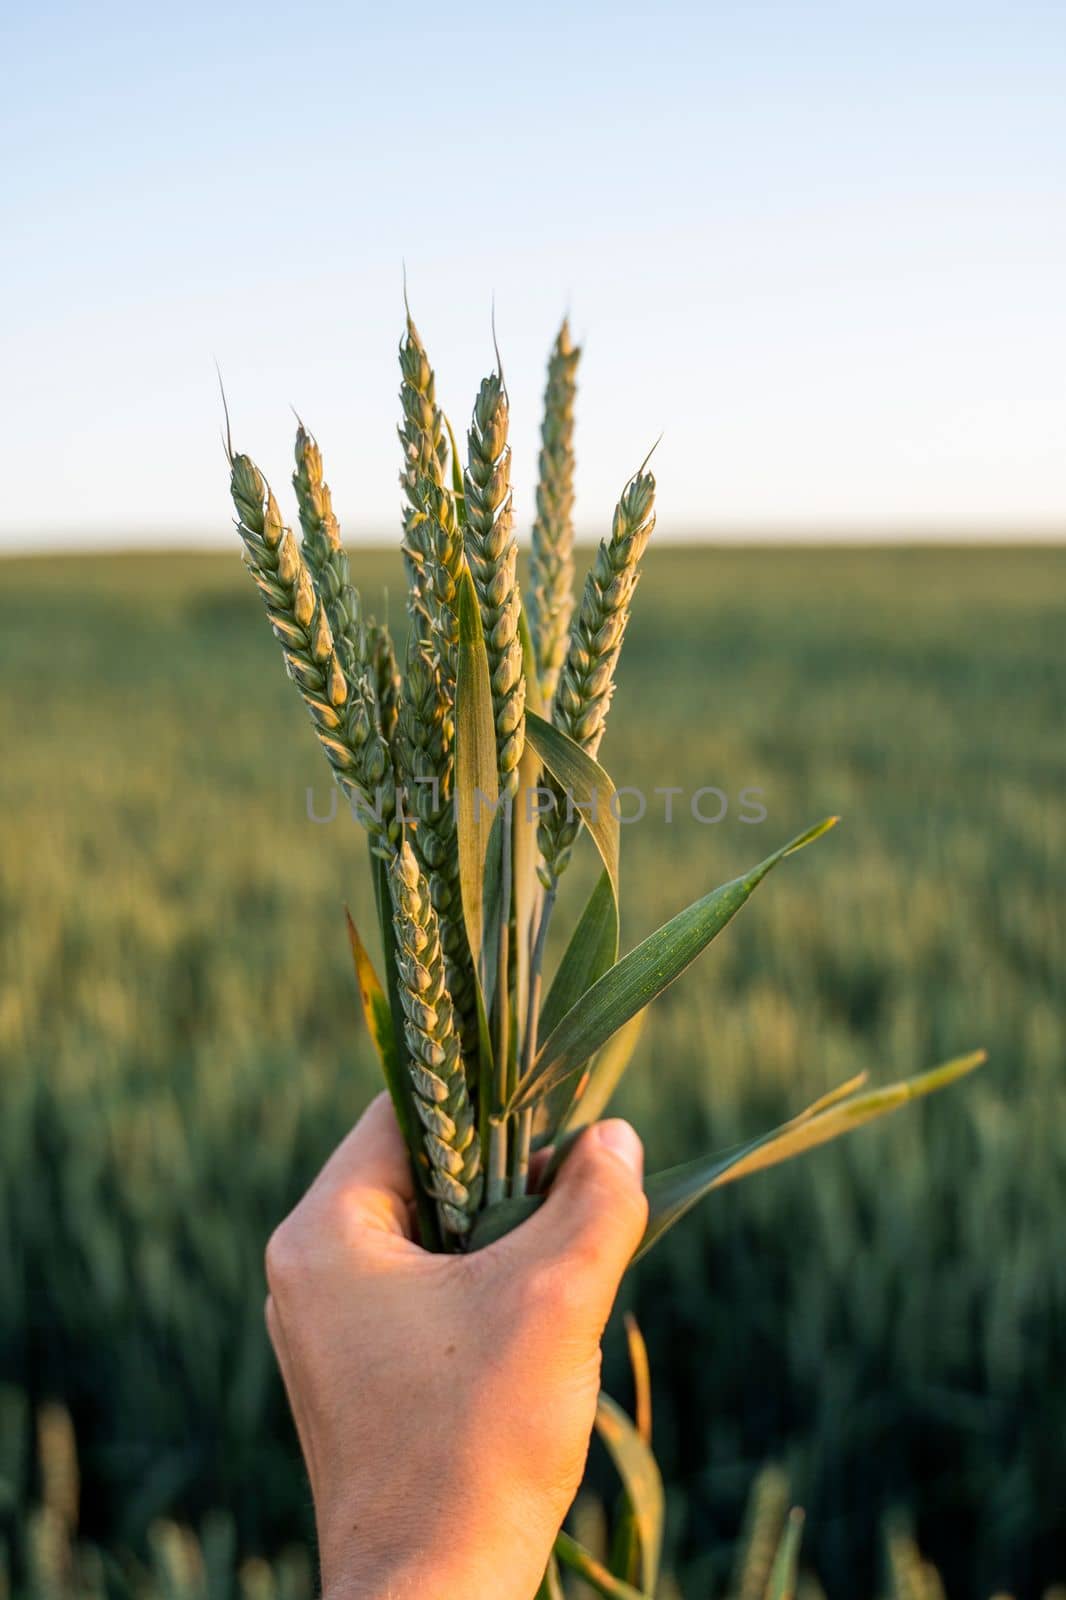 Young wheat spikes in farmers hand with a agricultural field on background, rural landscape. Green unripe cereals. The concept of agriculture, healthy eating, organic food